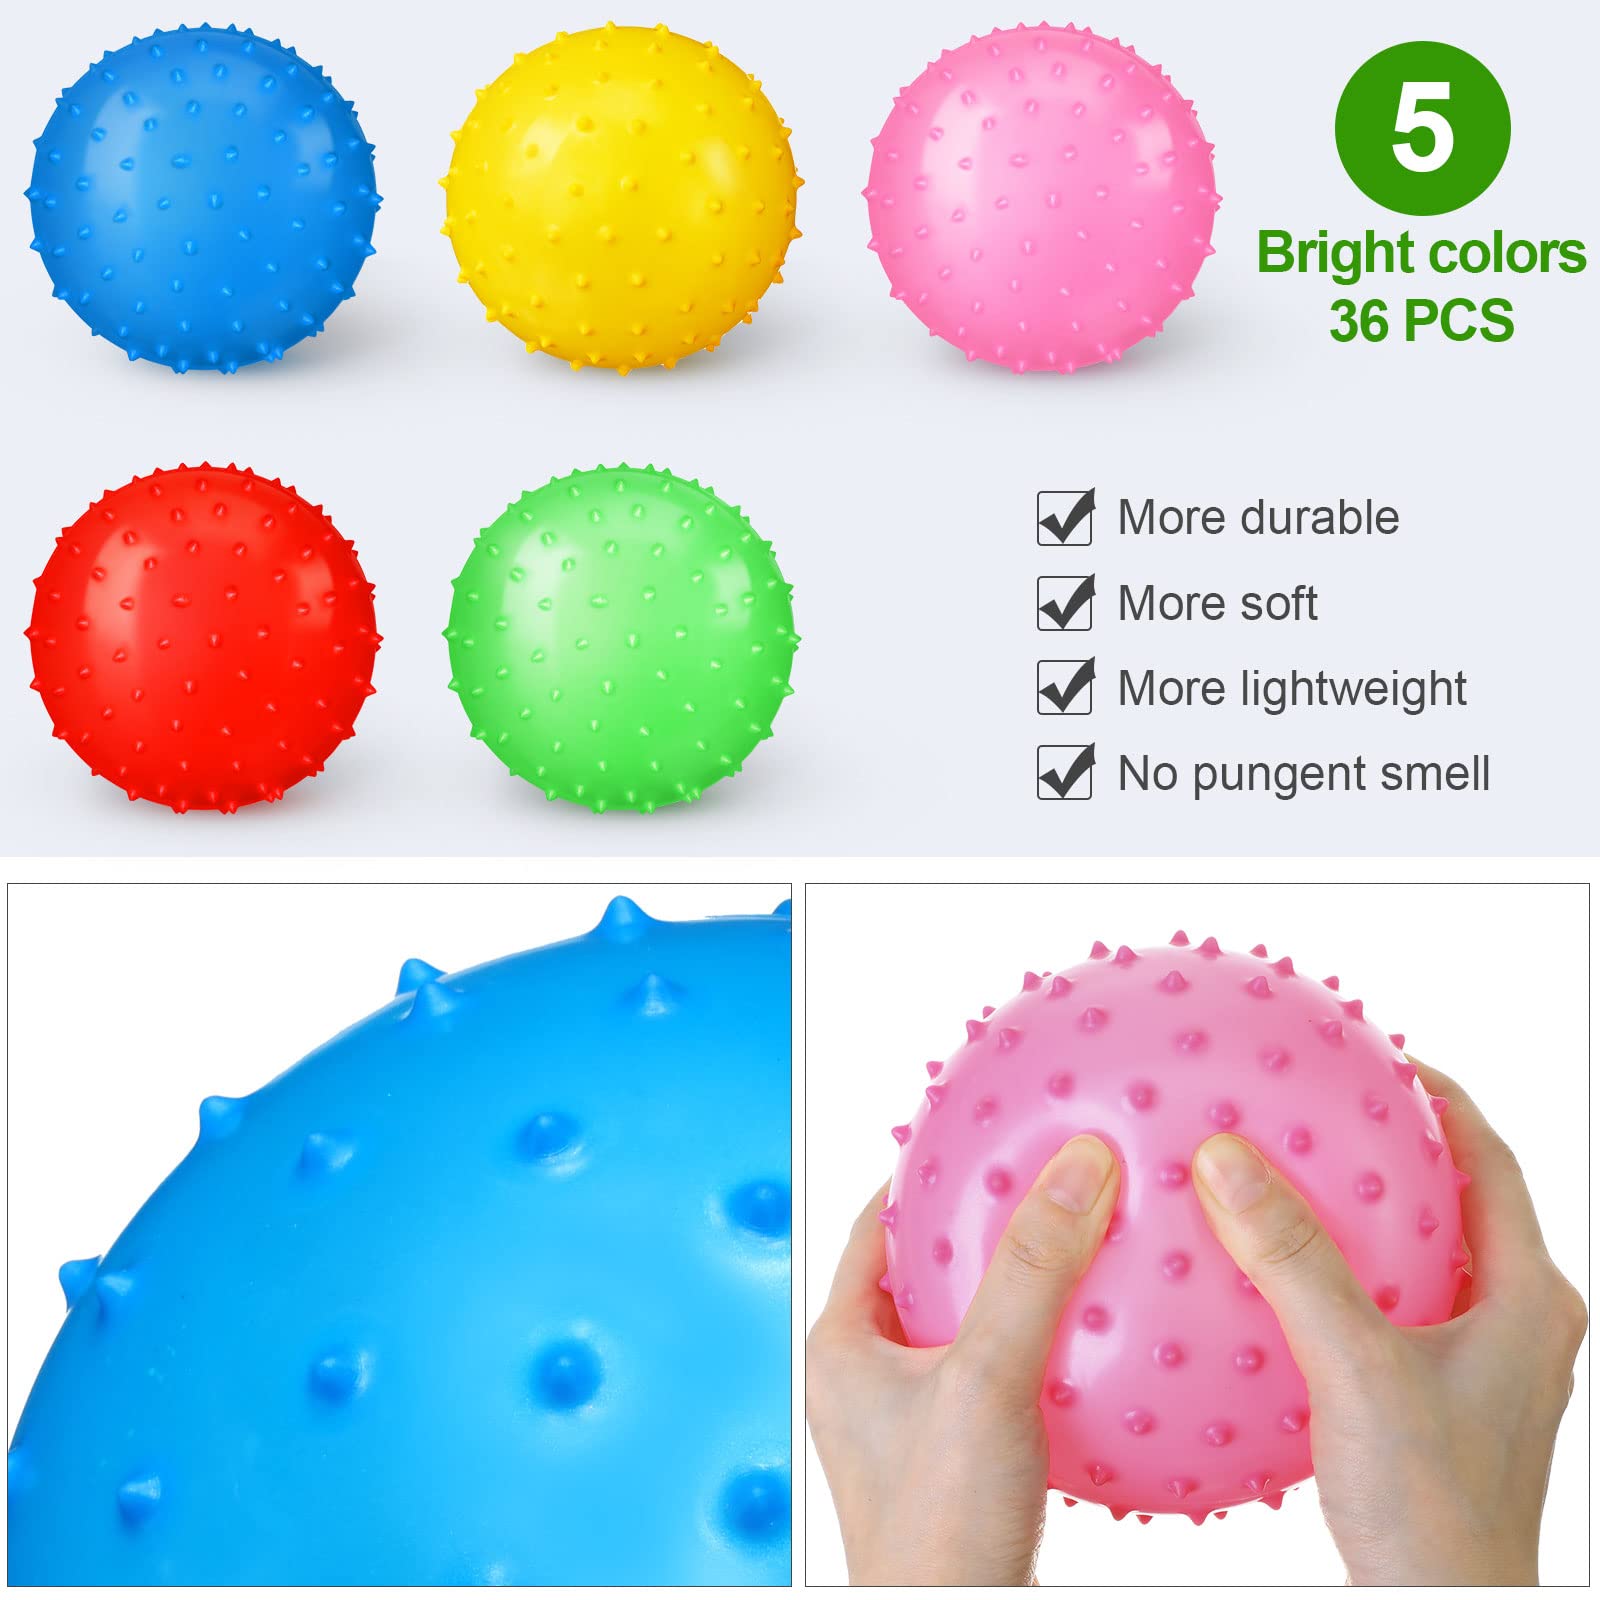 Vinsot 36 Pieces Knobby Balls 4.72 Inch Soft Bouncy Balls Tactile Sensory Balls with Air Pump Set Assorted Color Spiky Massage Stress Balls Fidget Toys and Party Favors Red/Yellow/Green/Blue/Pink